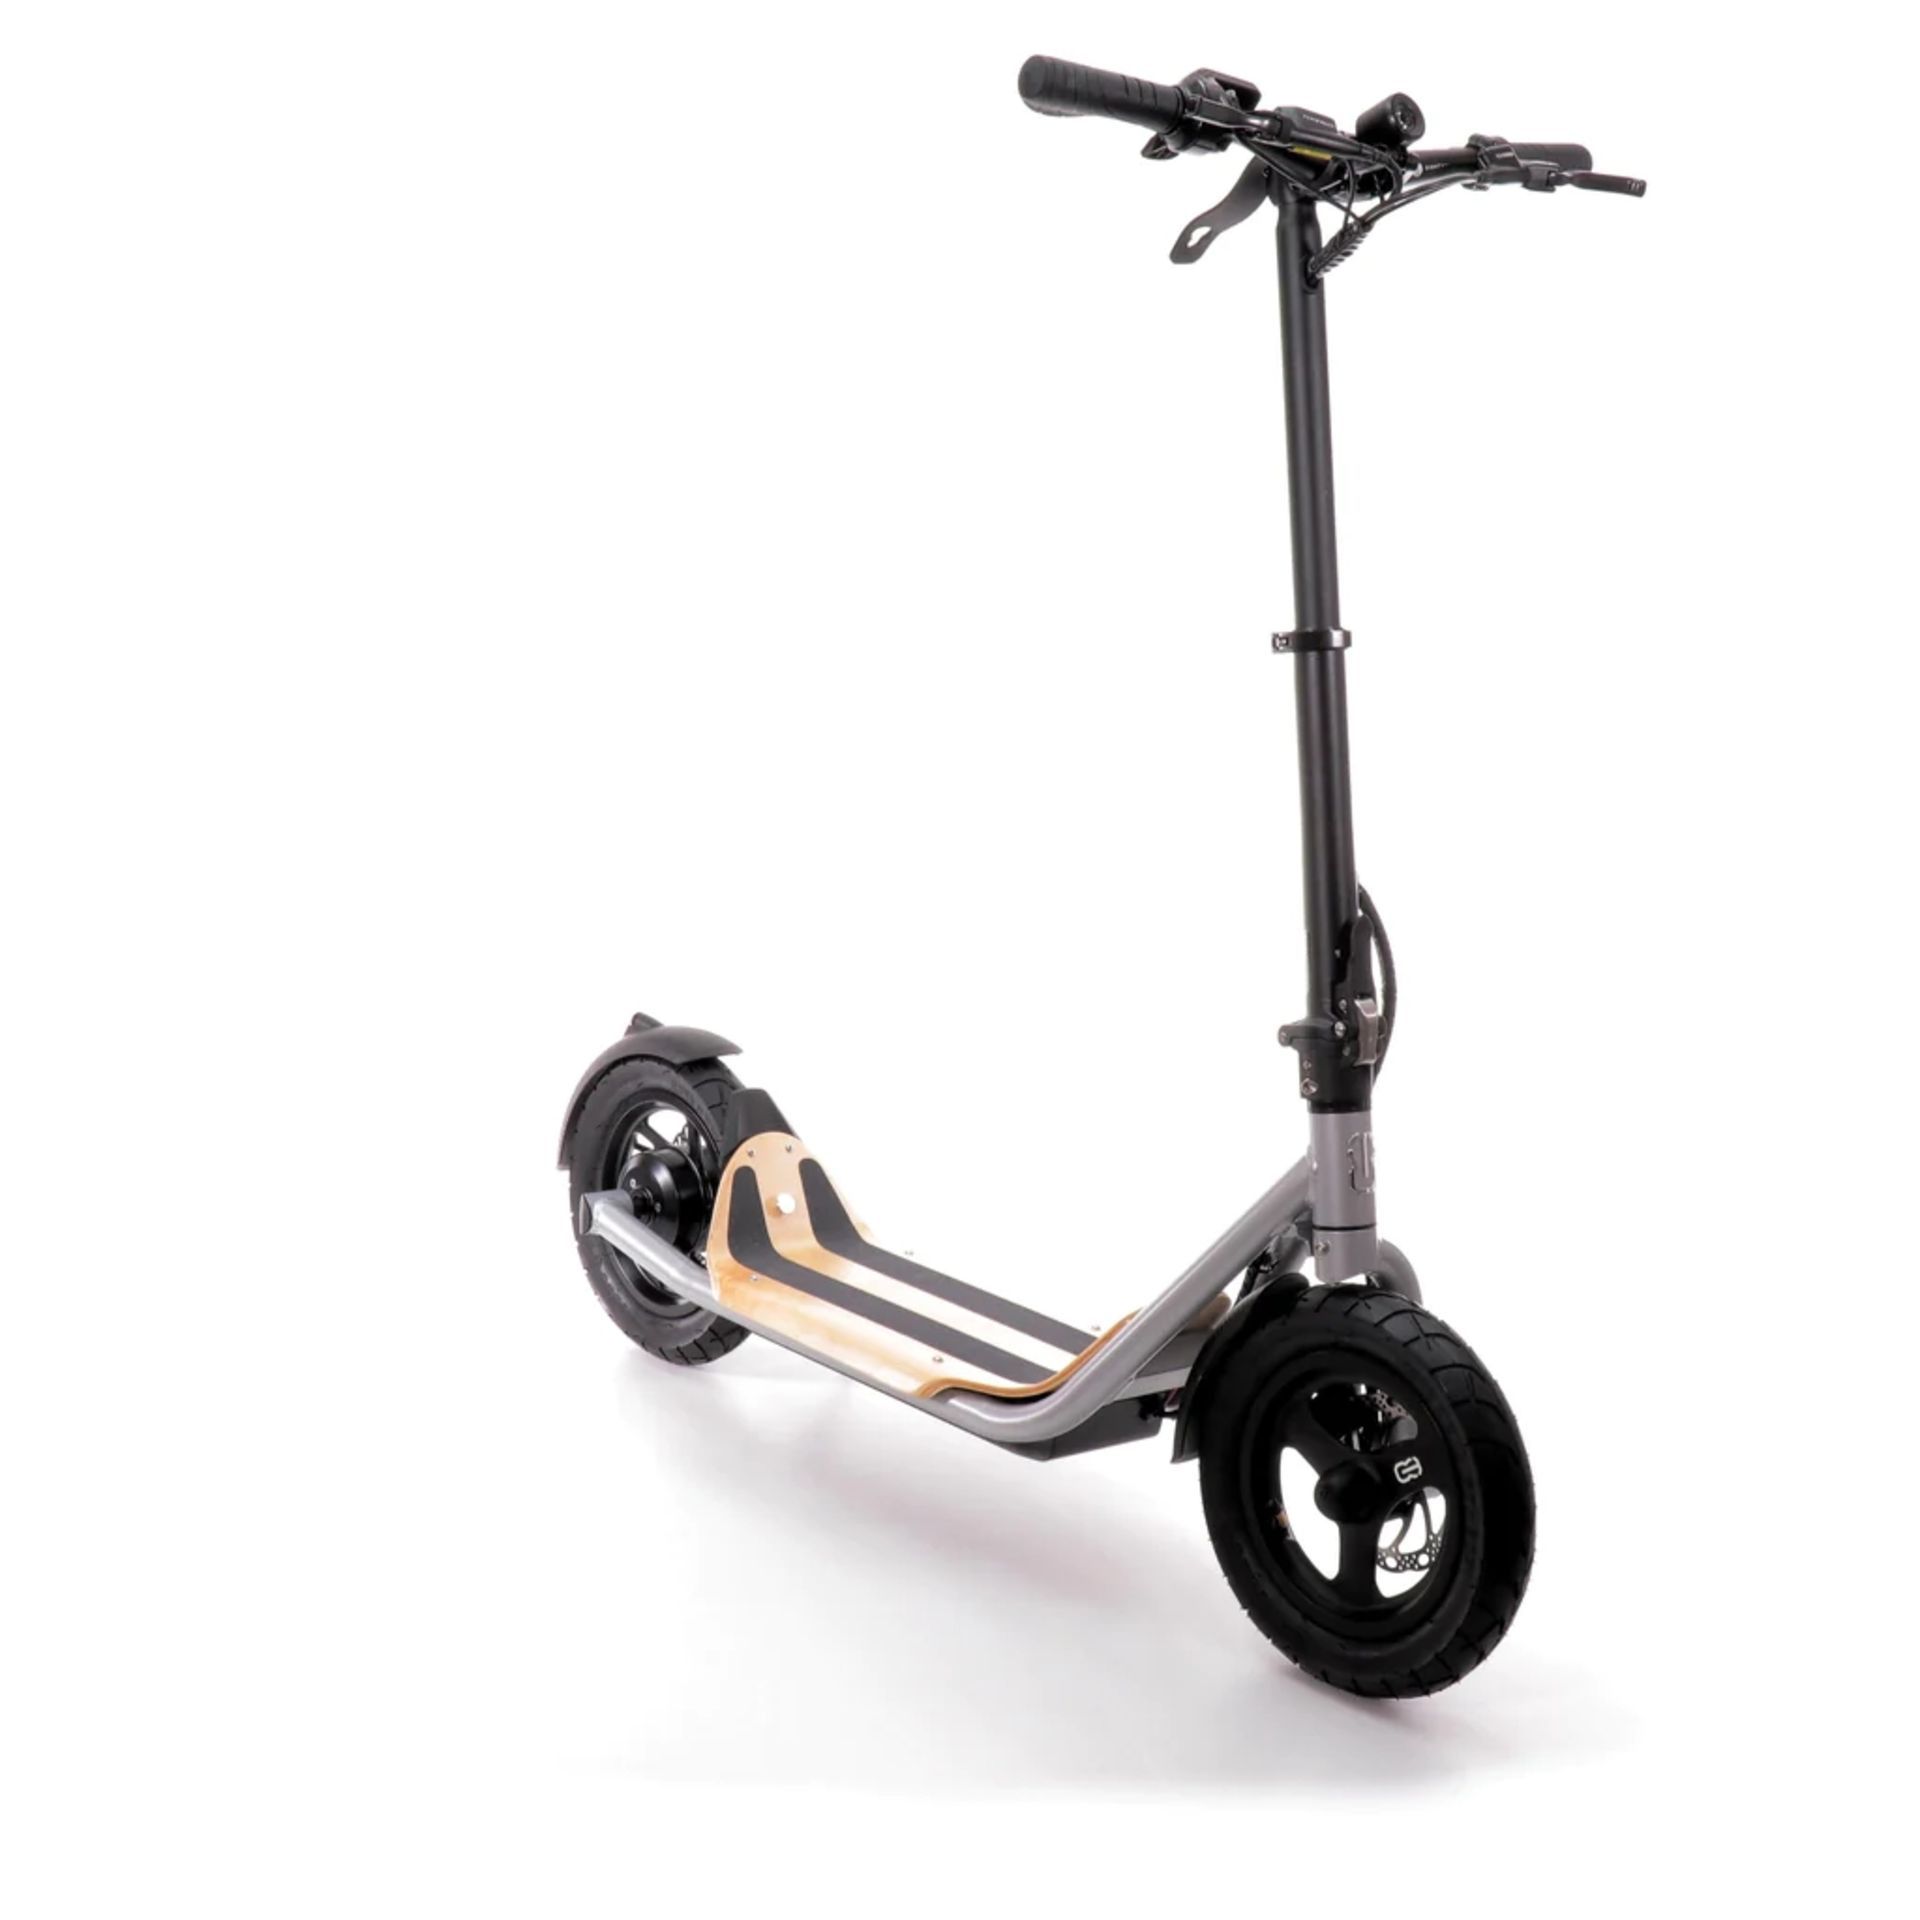 BRAND NEW 8TEV B12 PROXI CLASSIC ELECTRIC SCOOTER SILVER RRP £1299, Perfect city commuter vehicle